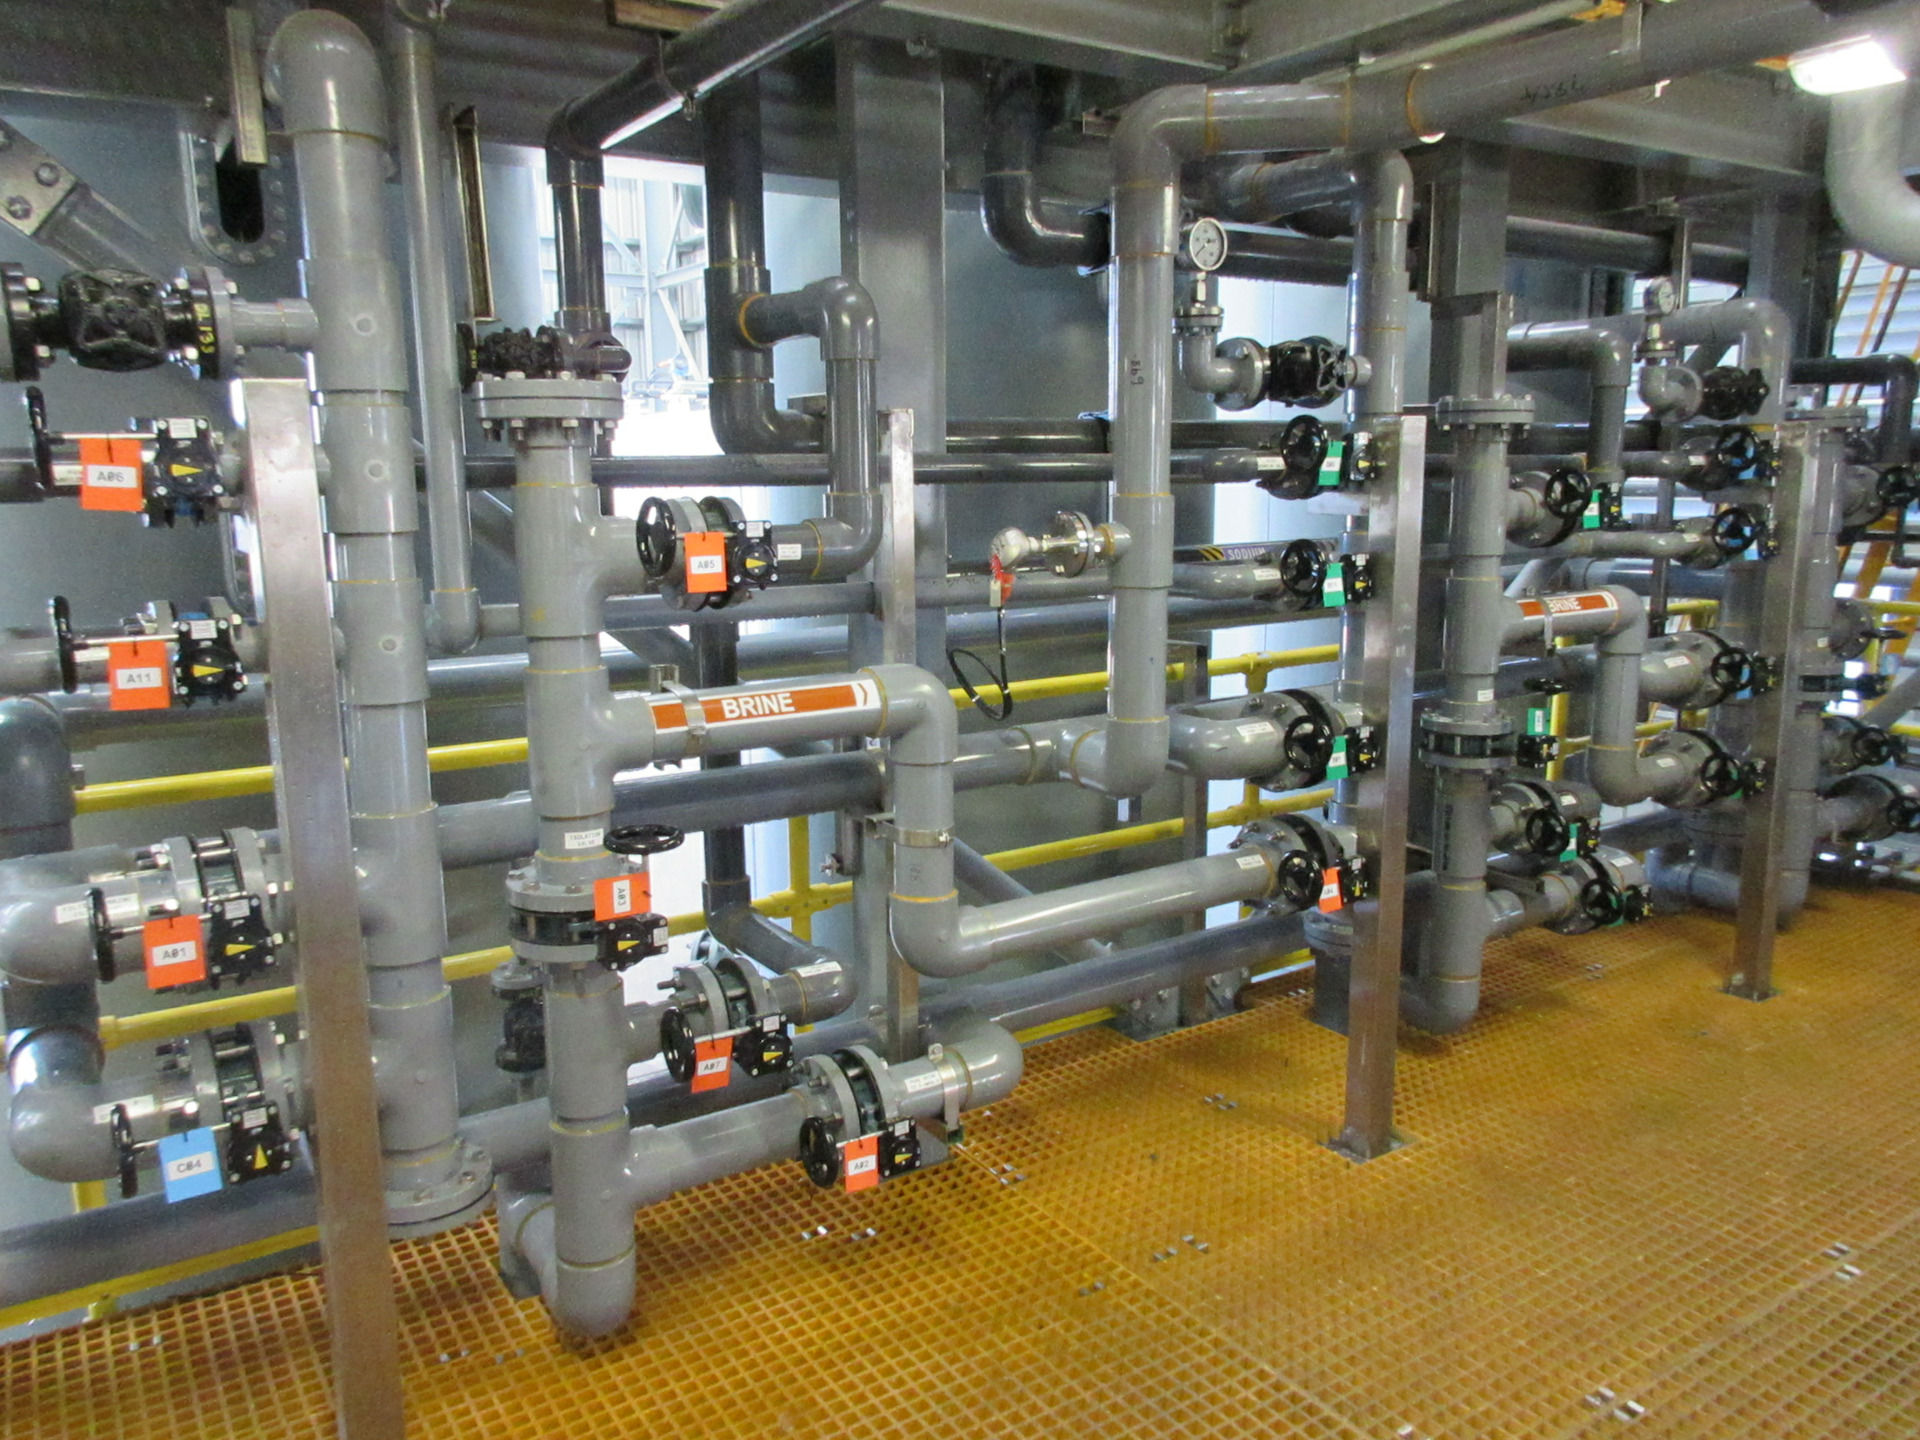 Chlor alkali brine purification plant at Coogee Chemicals in Lytton, Australia.